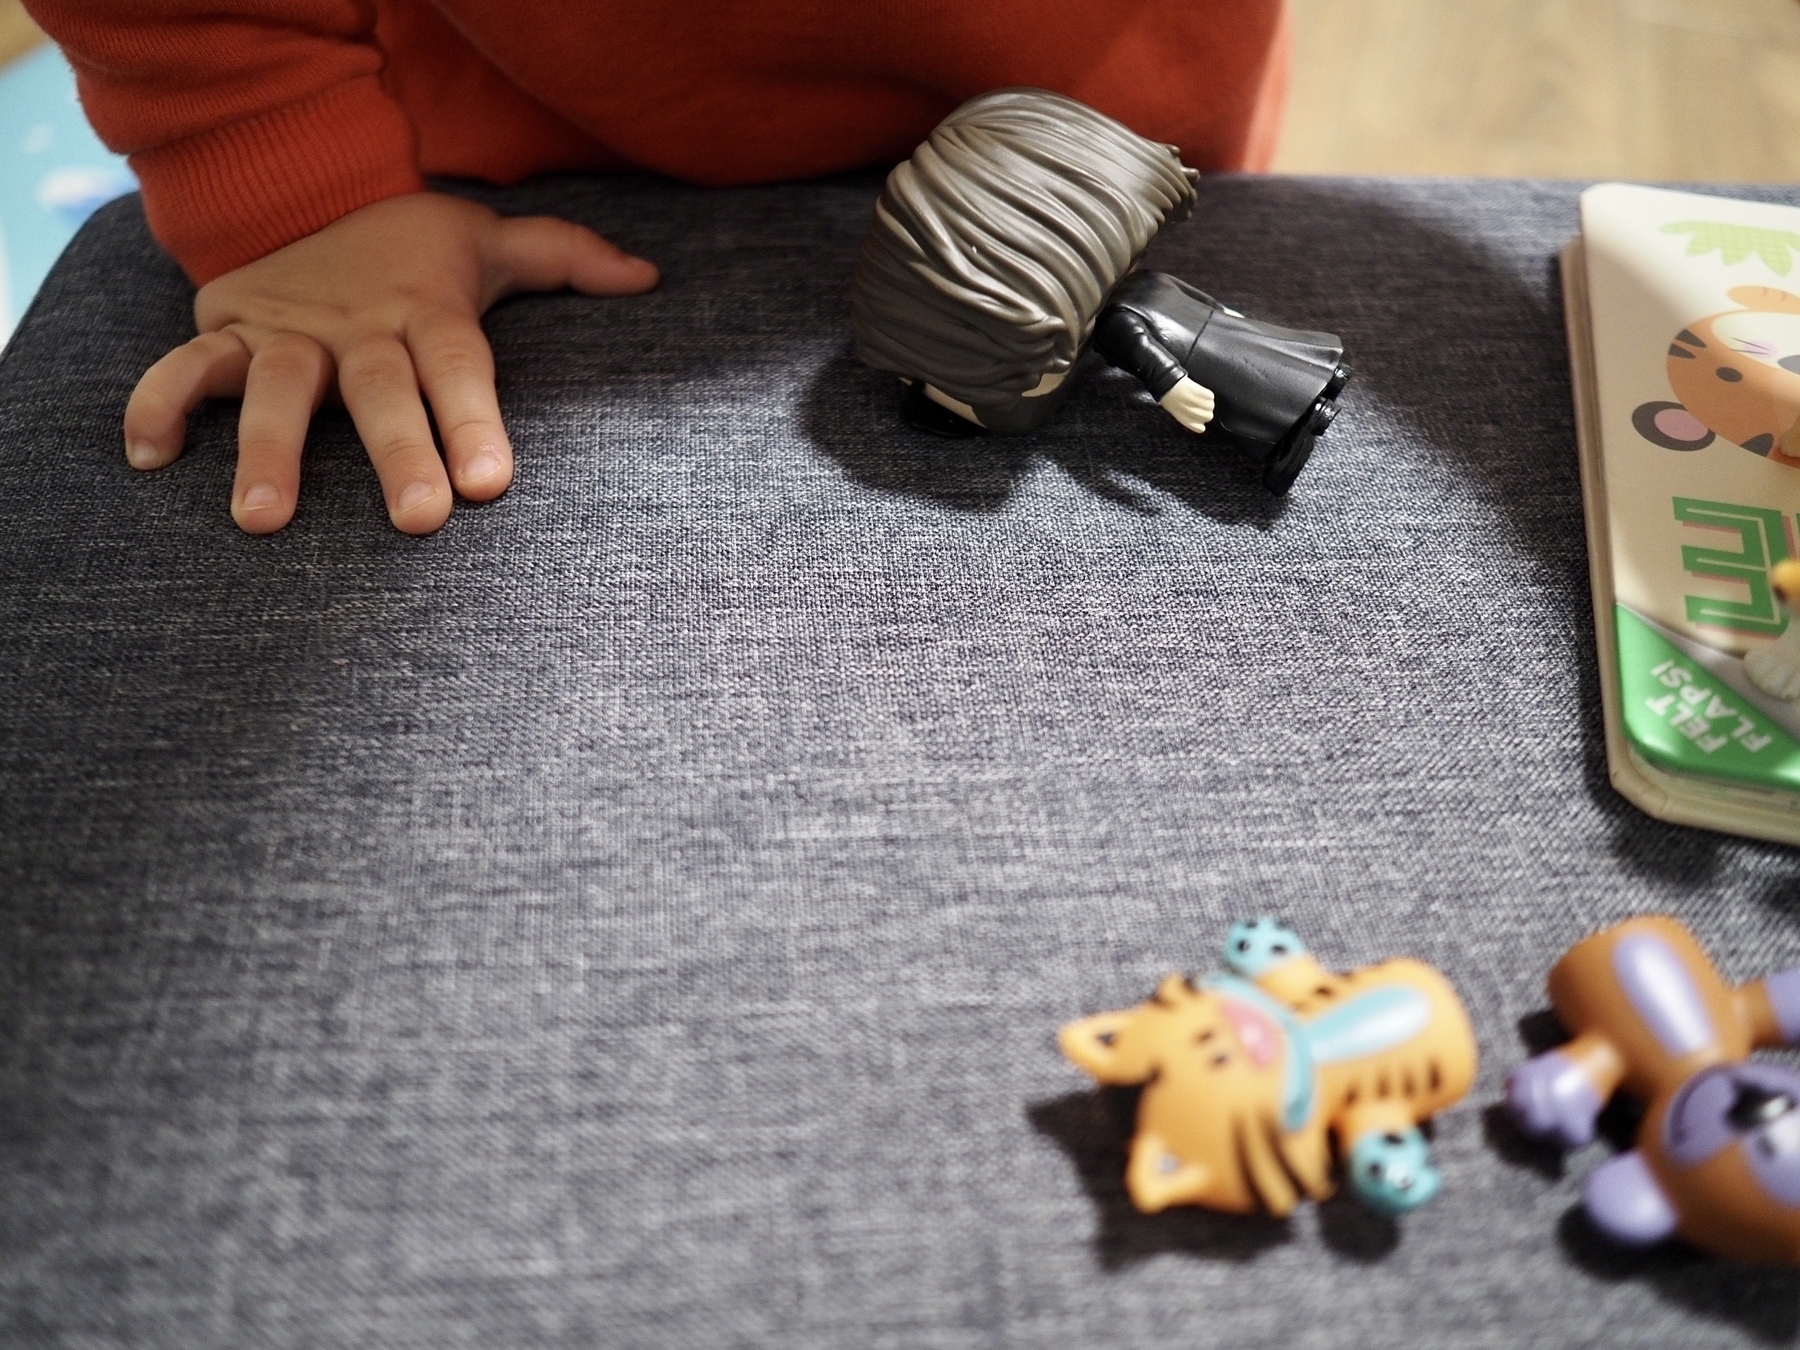 A toddler’s hand next to toys on a footrest